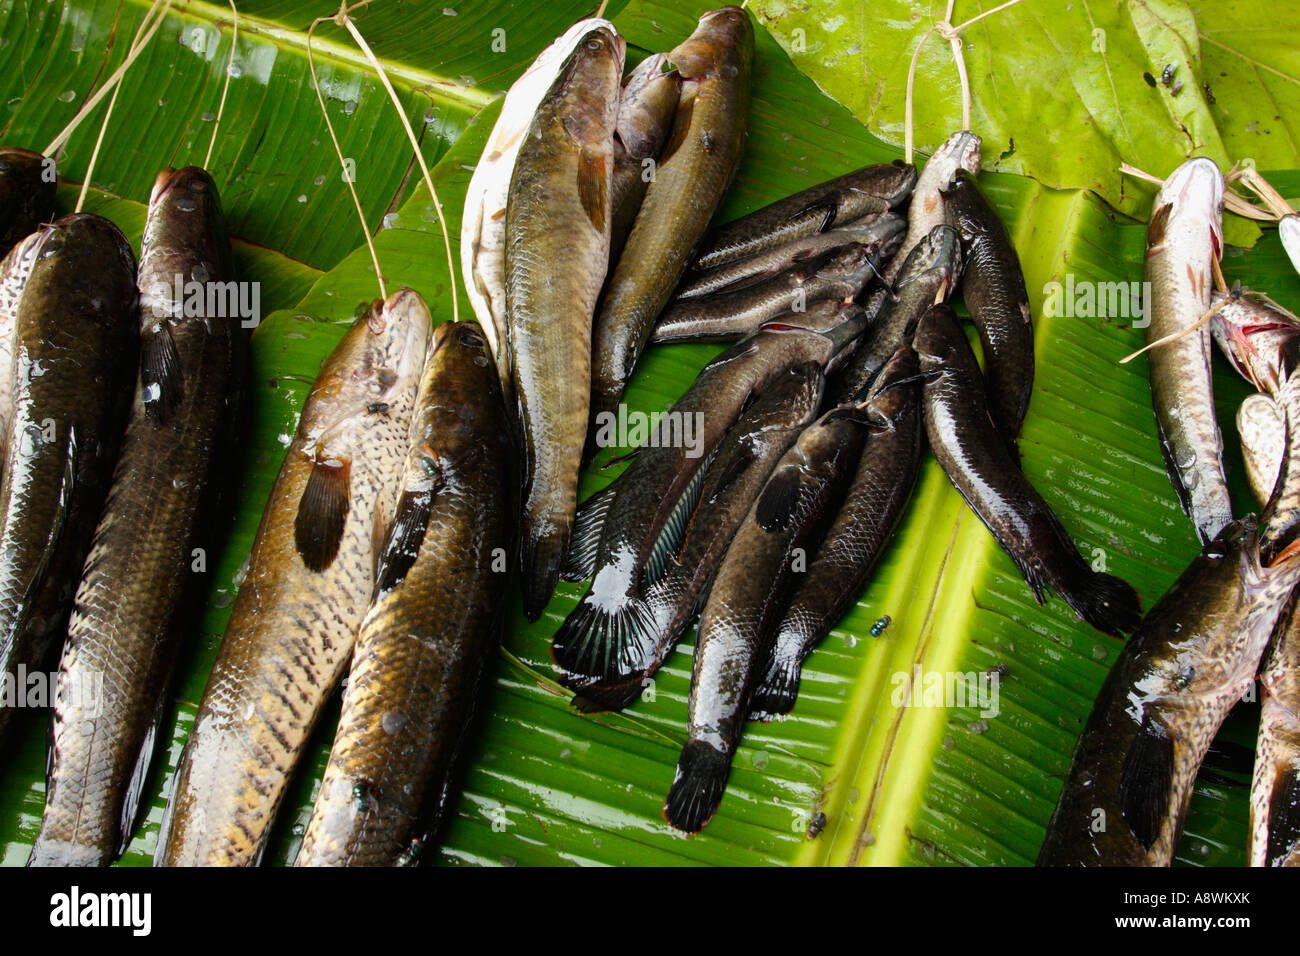 Asia, Myanmar, Snakehead fish (Channa sp.) for sale at morning market Stock Photo